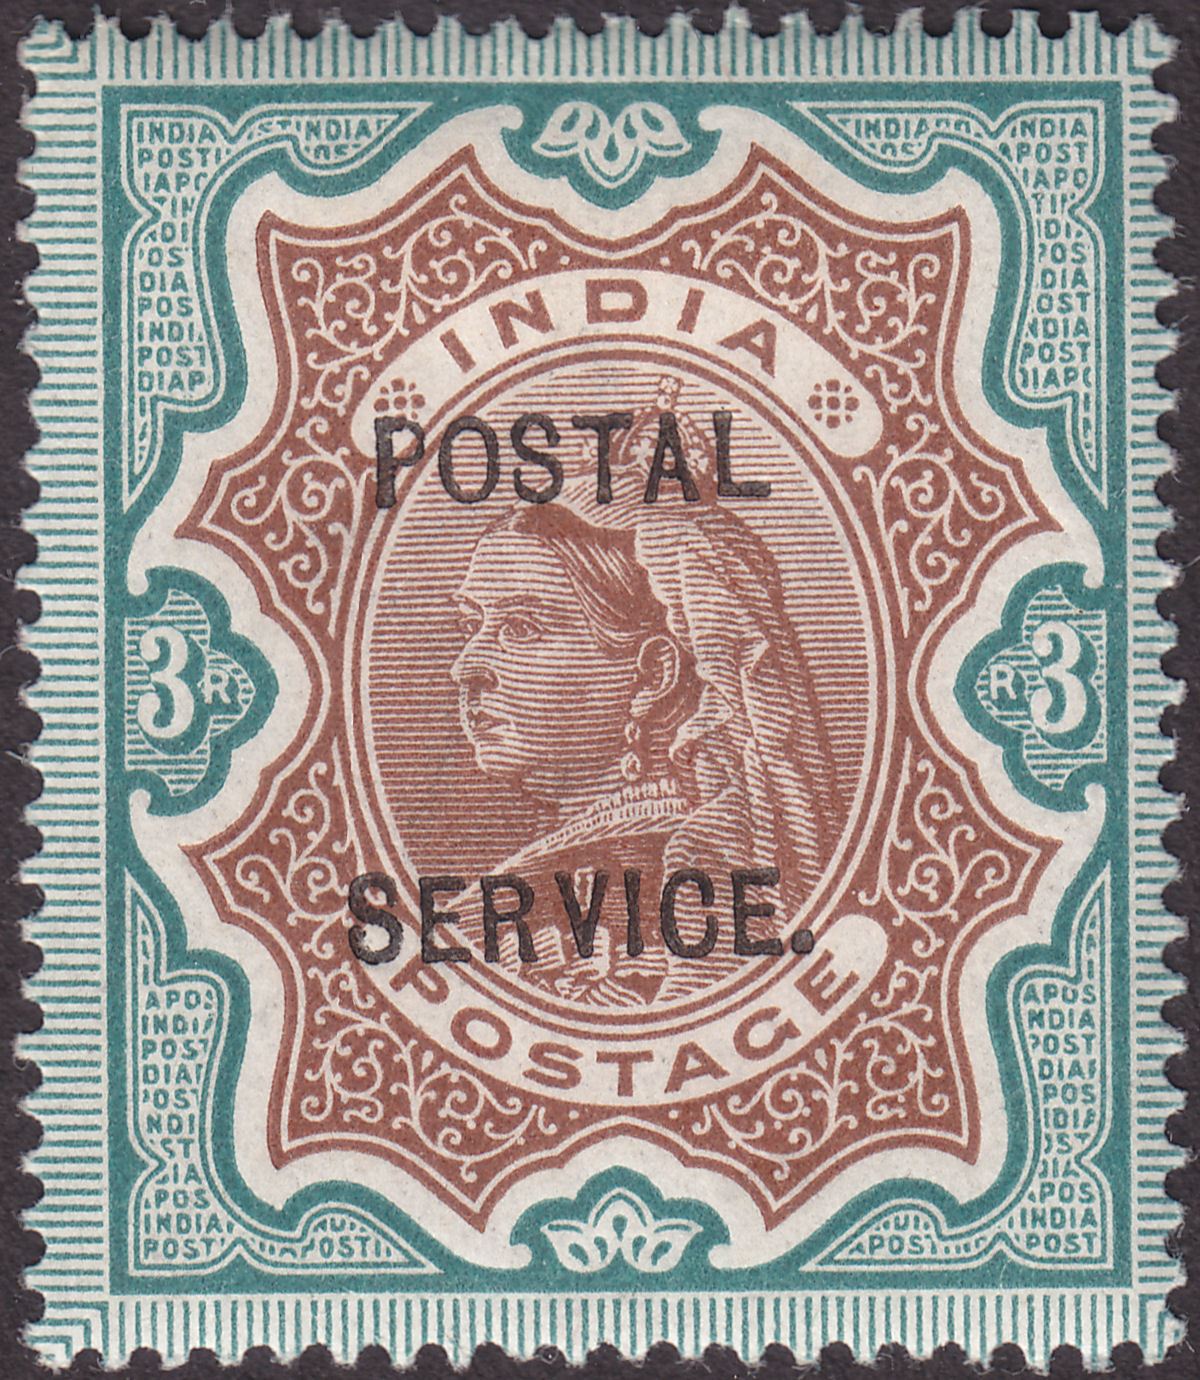 India 1895 QV Revenue Postal Service Overprint 3r Brown and Green Mint